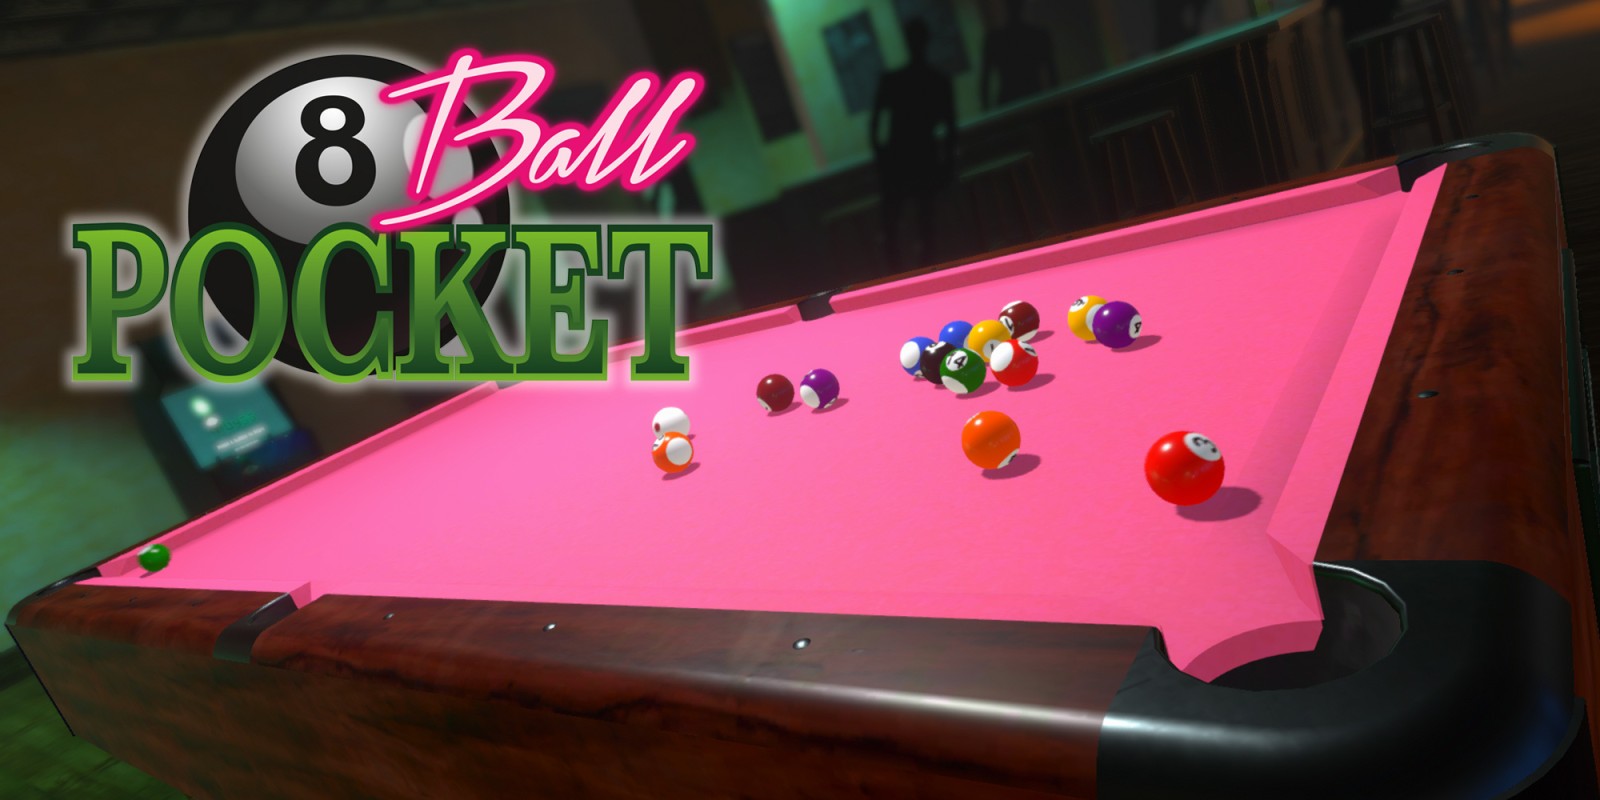 8-Ball Pocket | Nintendo Switch download software | Games ...